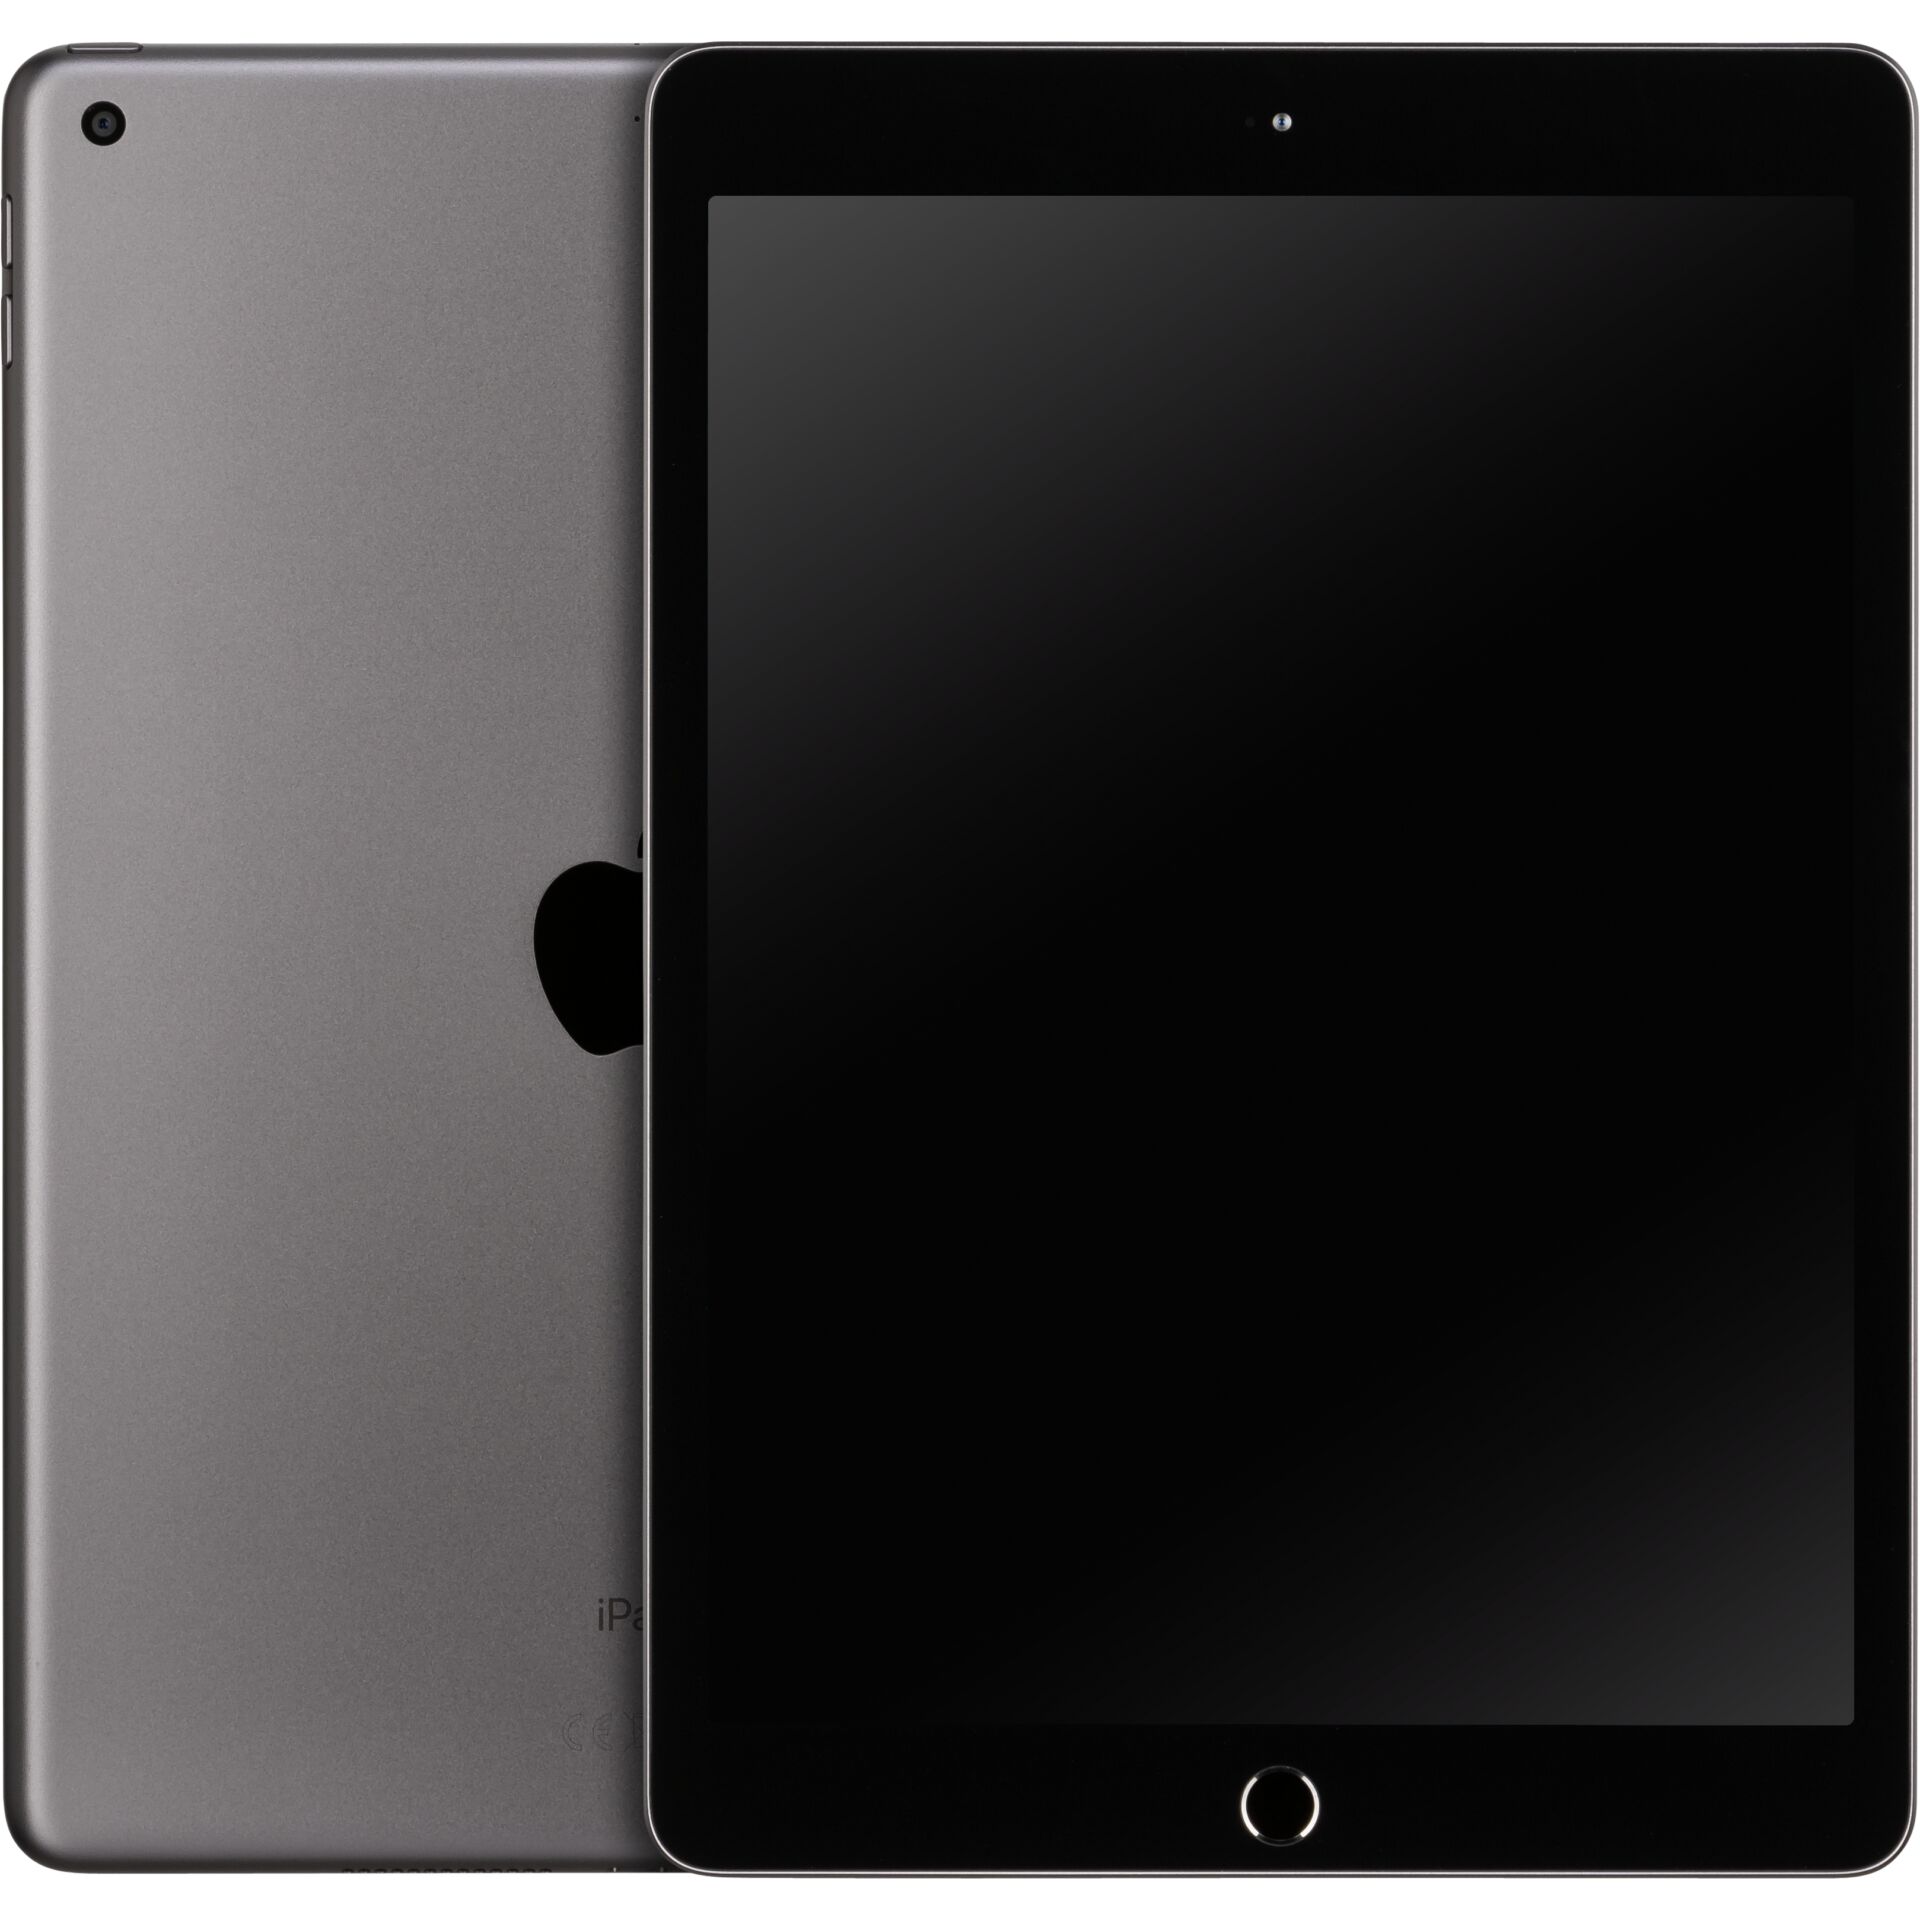 Apple iPad 9 64GB, Space Gray, 10.2 Zoll 2160x1620, 265ppi, Multi-Touch, IPS, 500cd/m², fettabweisend